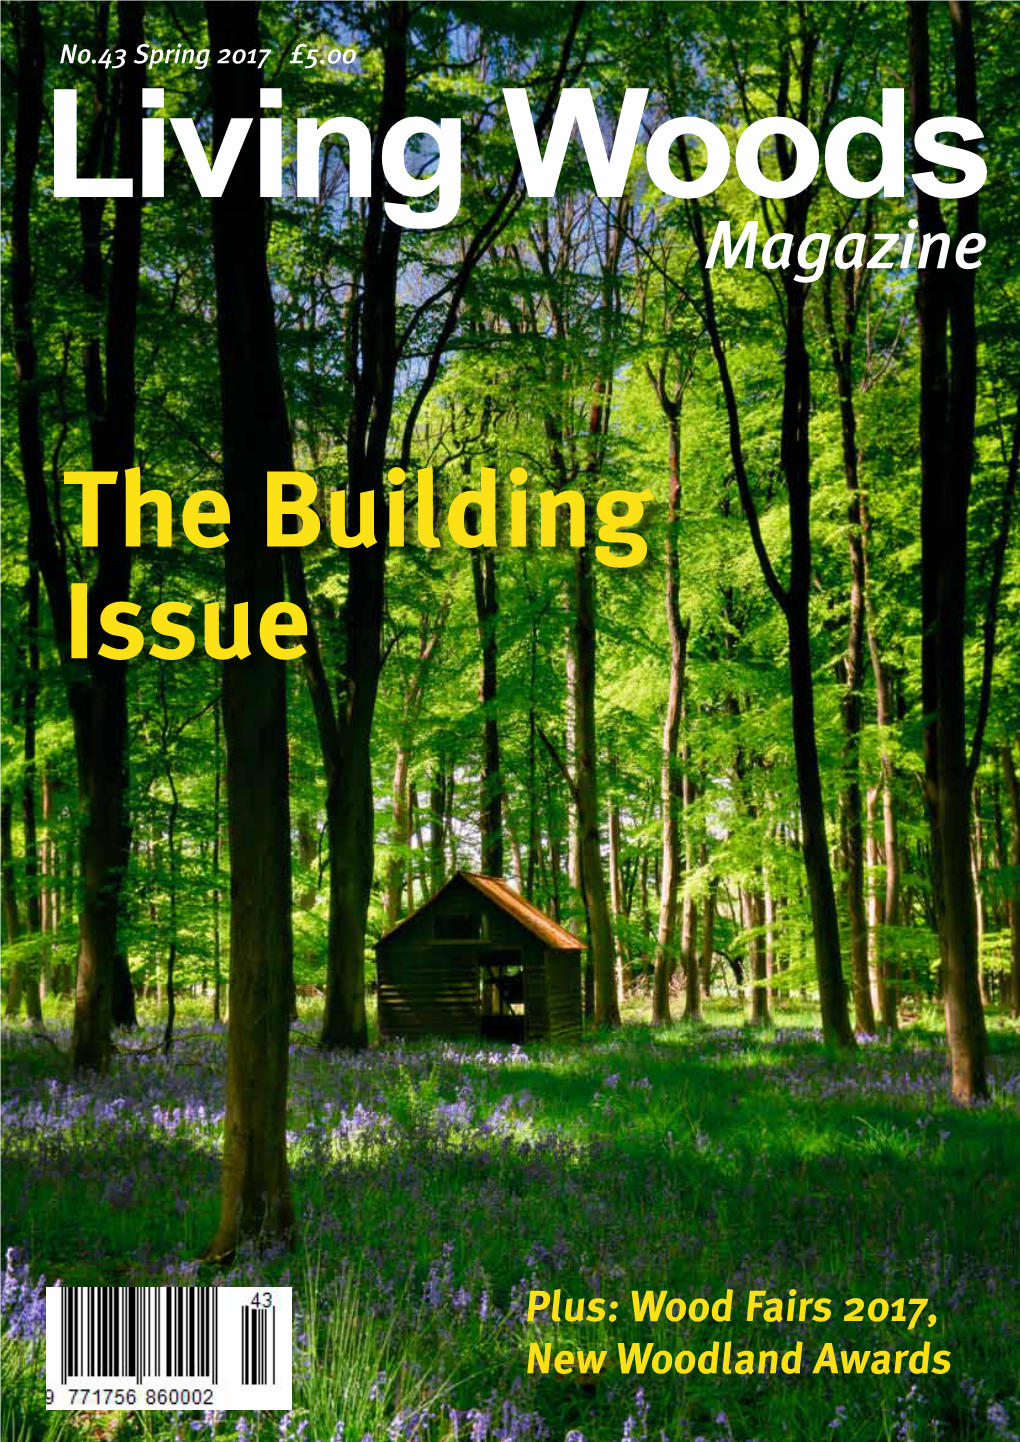 The Building Issue